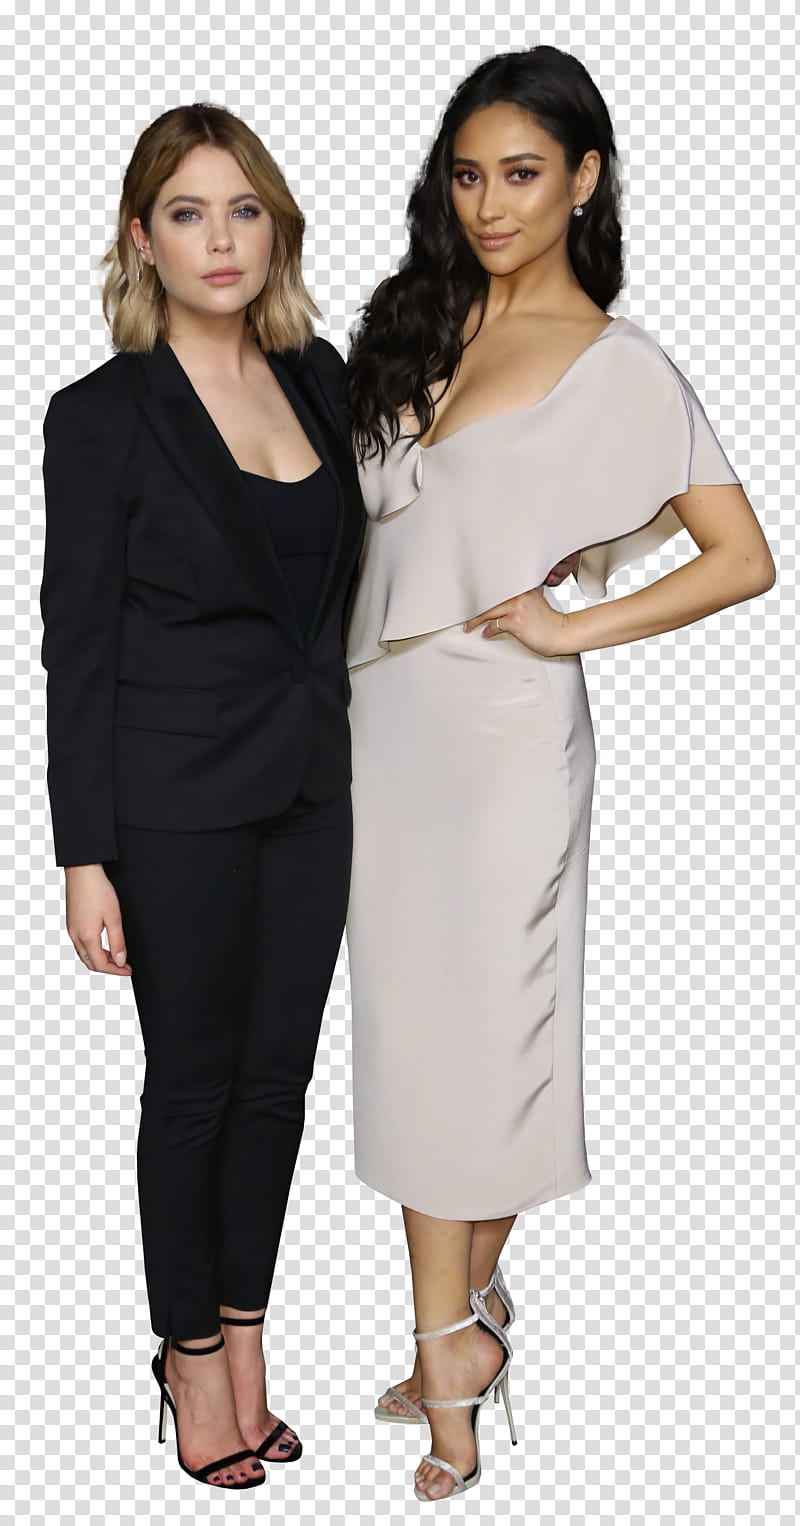 Ashley and Shay transparent background PNG clipart